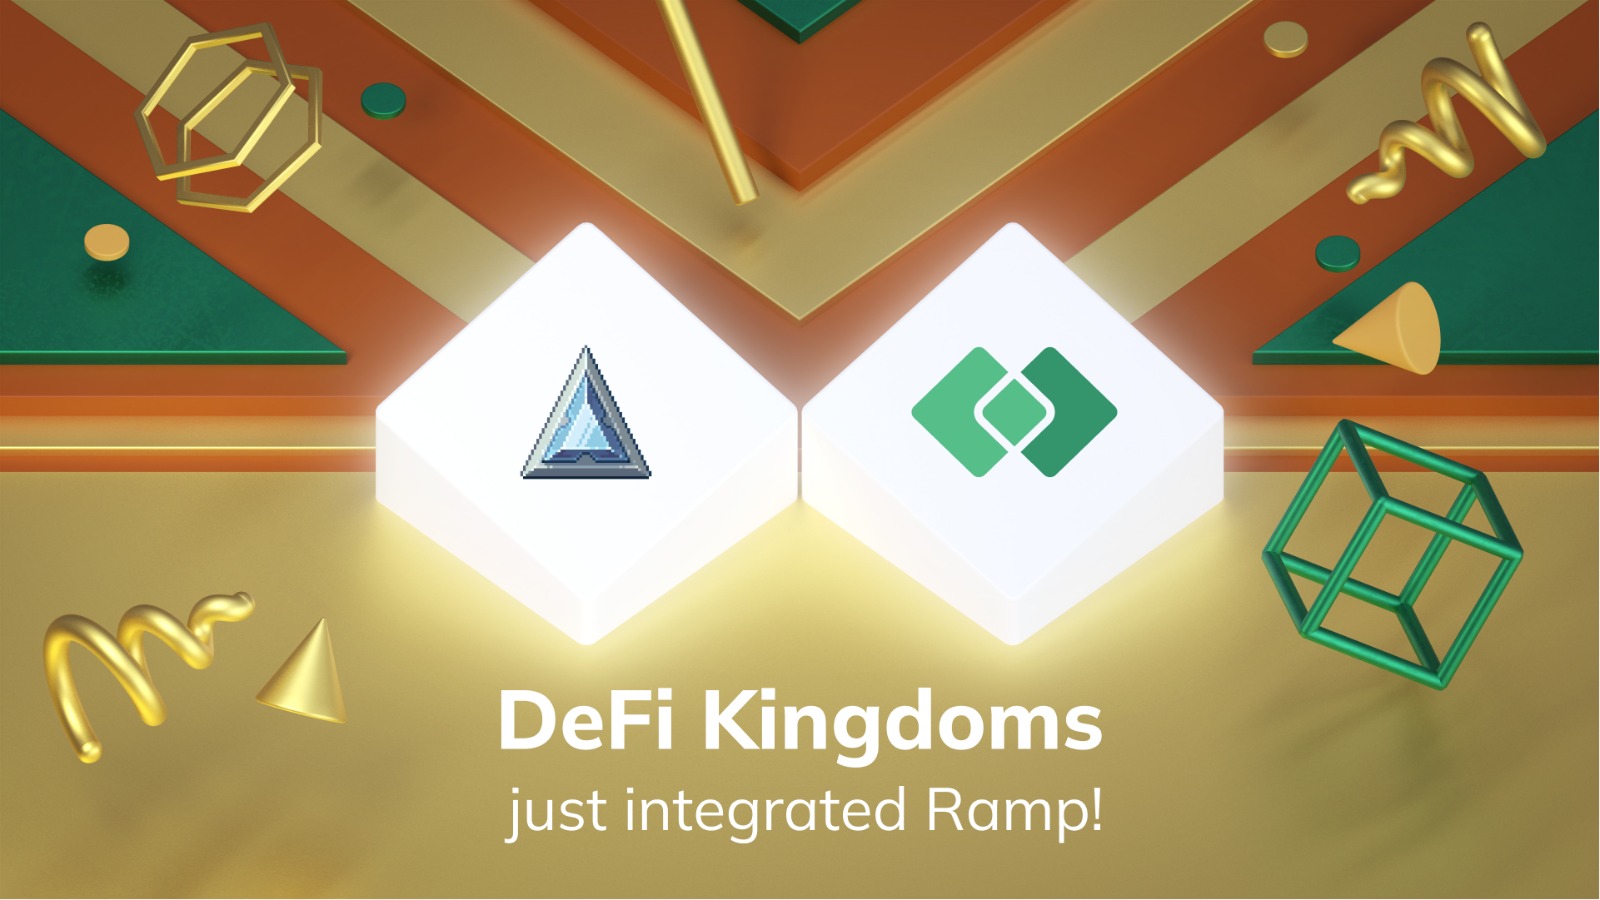 DeFi Kingdoms Integrates Ramp to Take in-Game Payments to the Next Level